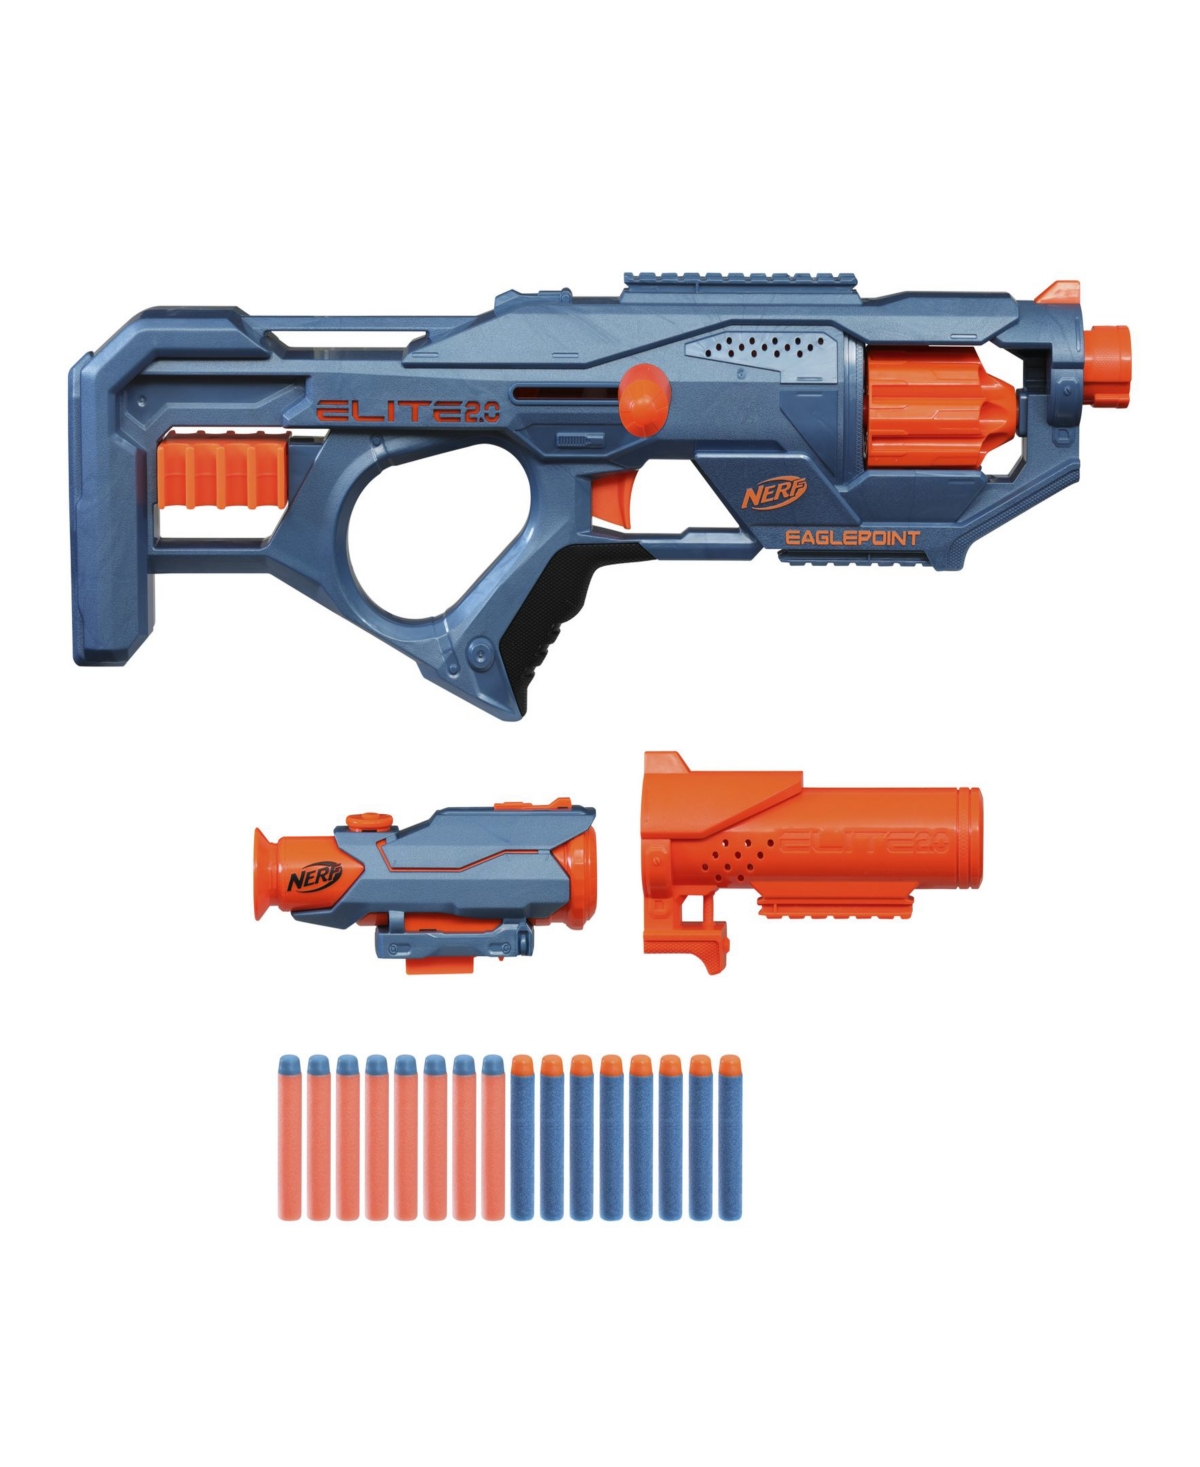 Nerf Kids' Elite 2.0 Eaglepoint Rd-8 Blaster, With Detachable Scope In No Color